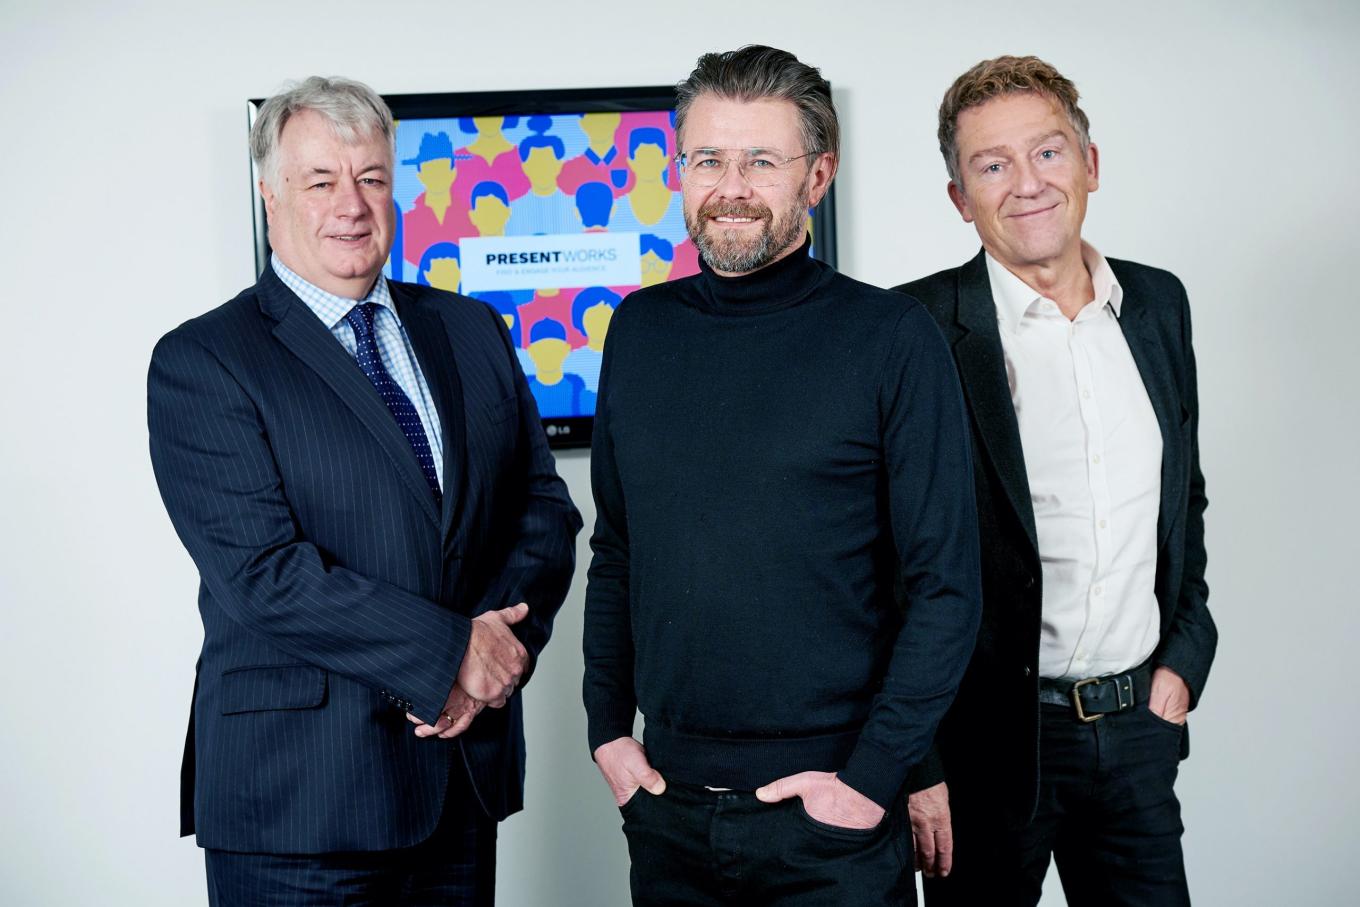 3 men from Present Works smiling and stood infront of a TV screen